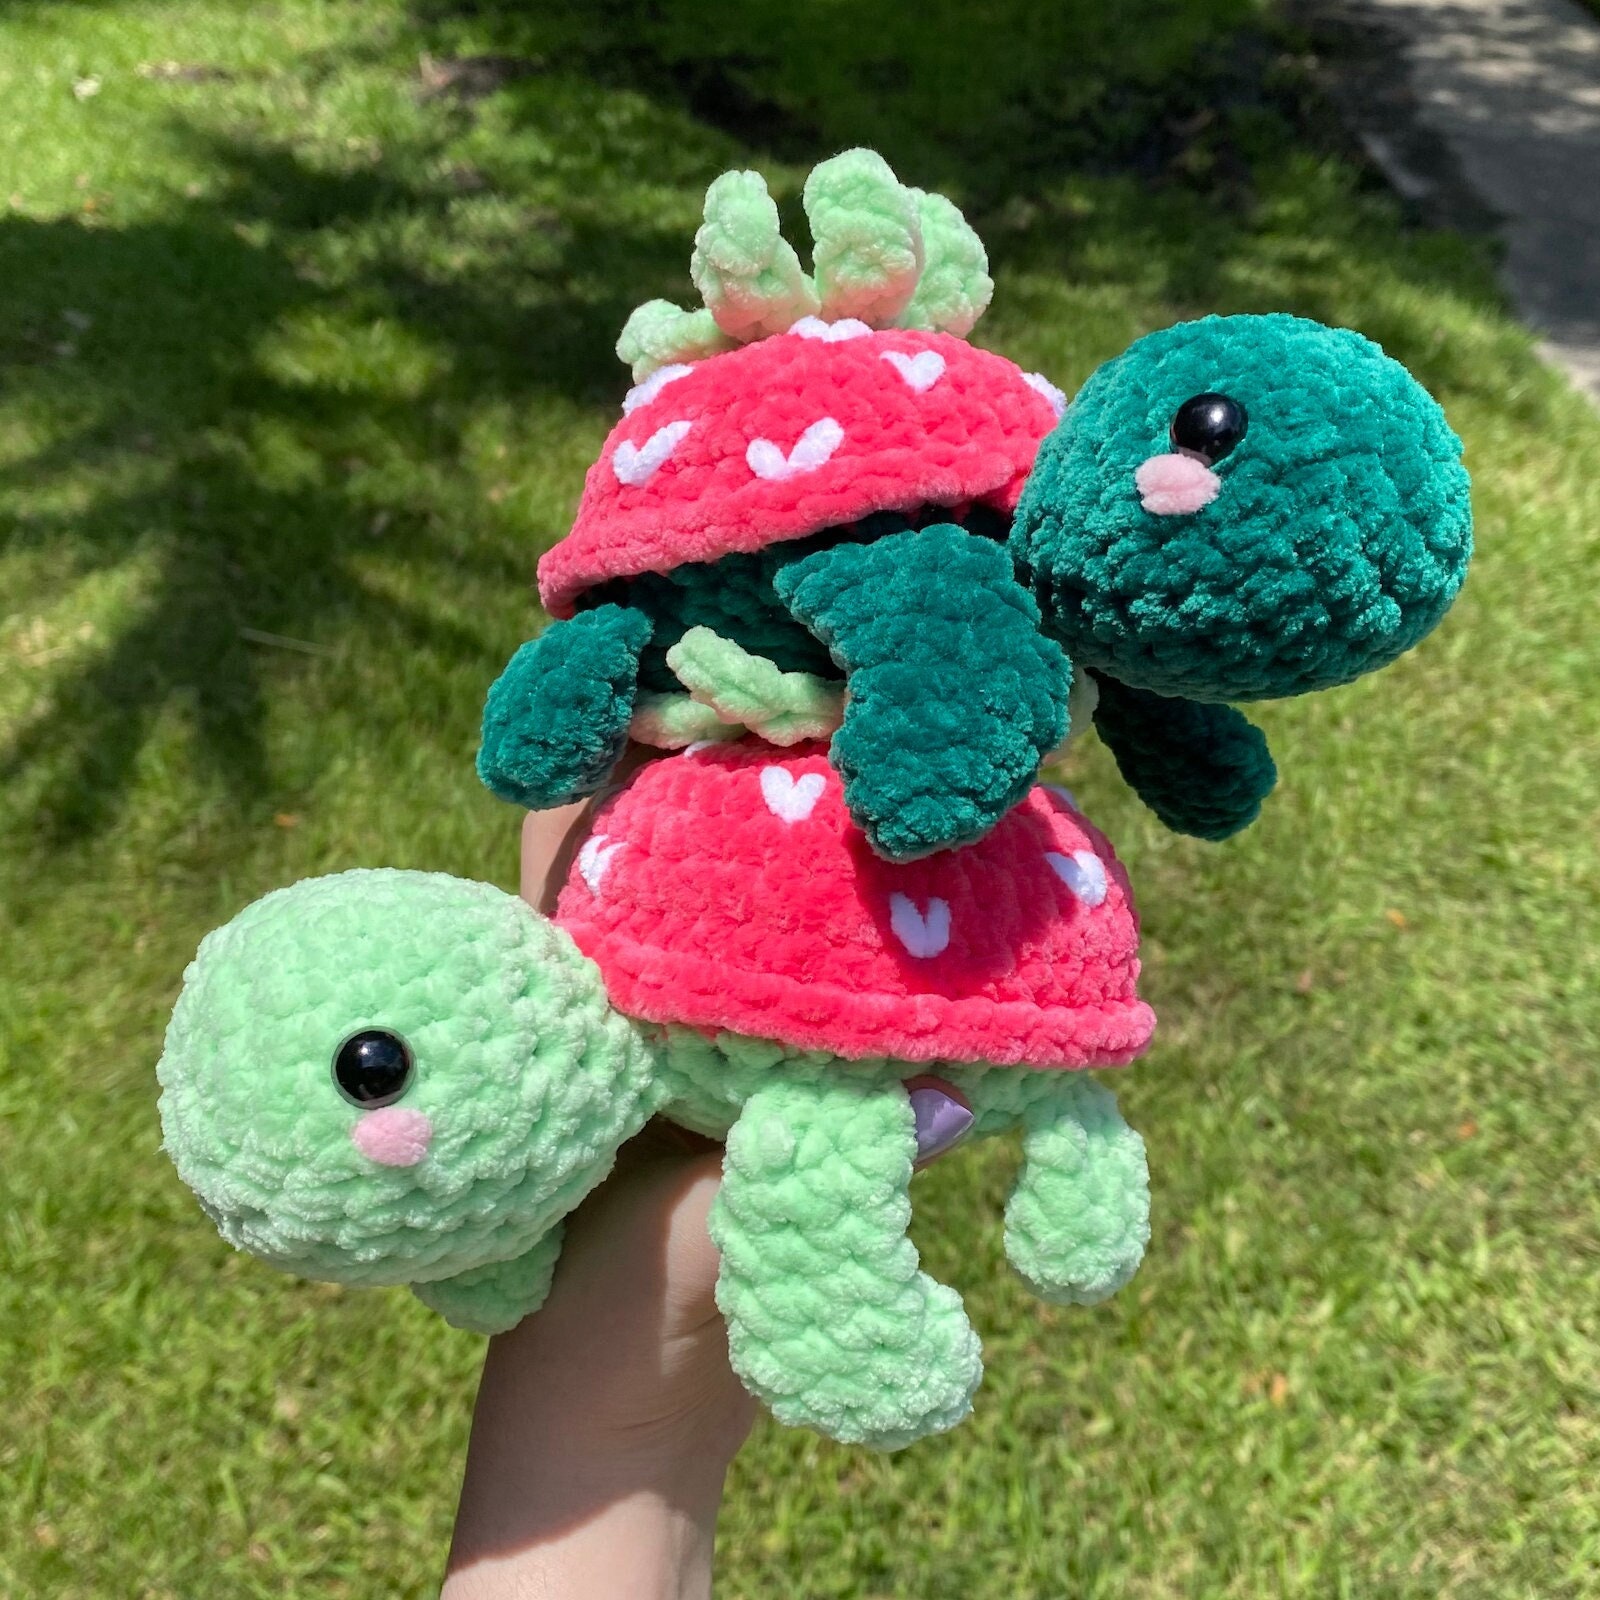 Crochet Turtle 9 inches Plushie Stuffed Animal Toy Tortoise | Perfect Gift  for All Ages, Birthdays & Occasions | Cozy, Cuddly & Decorative | Nursery